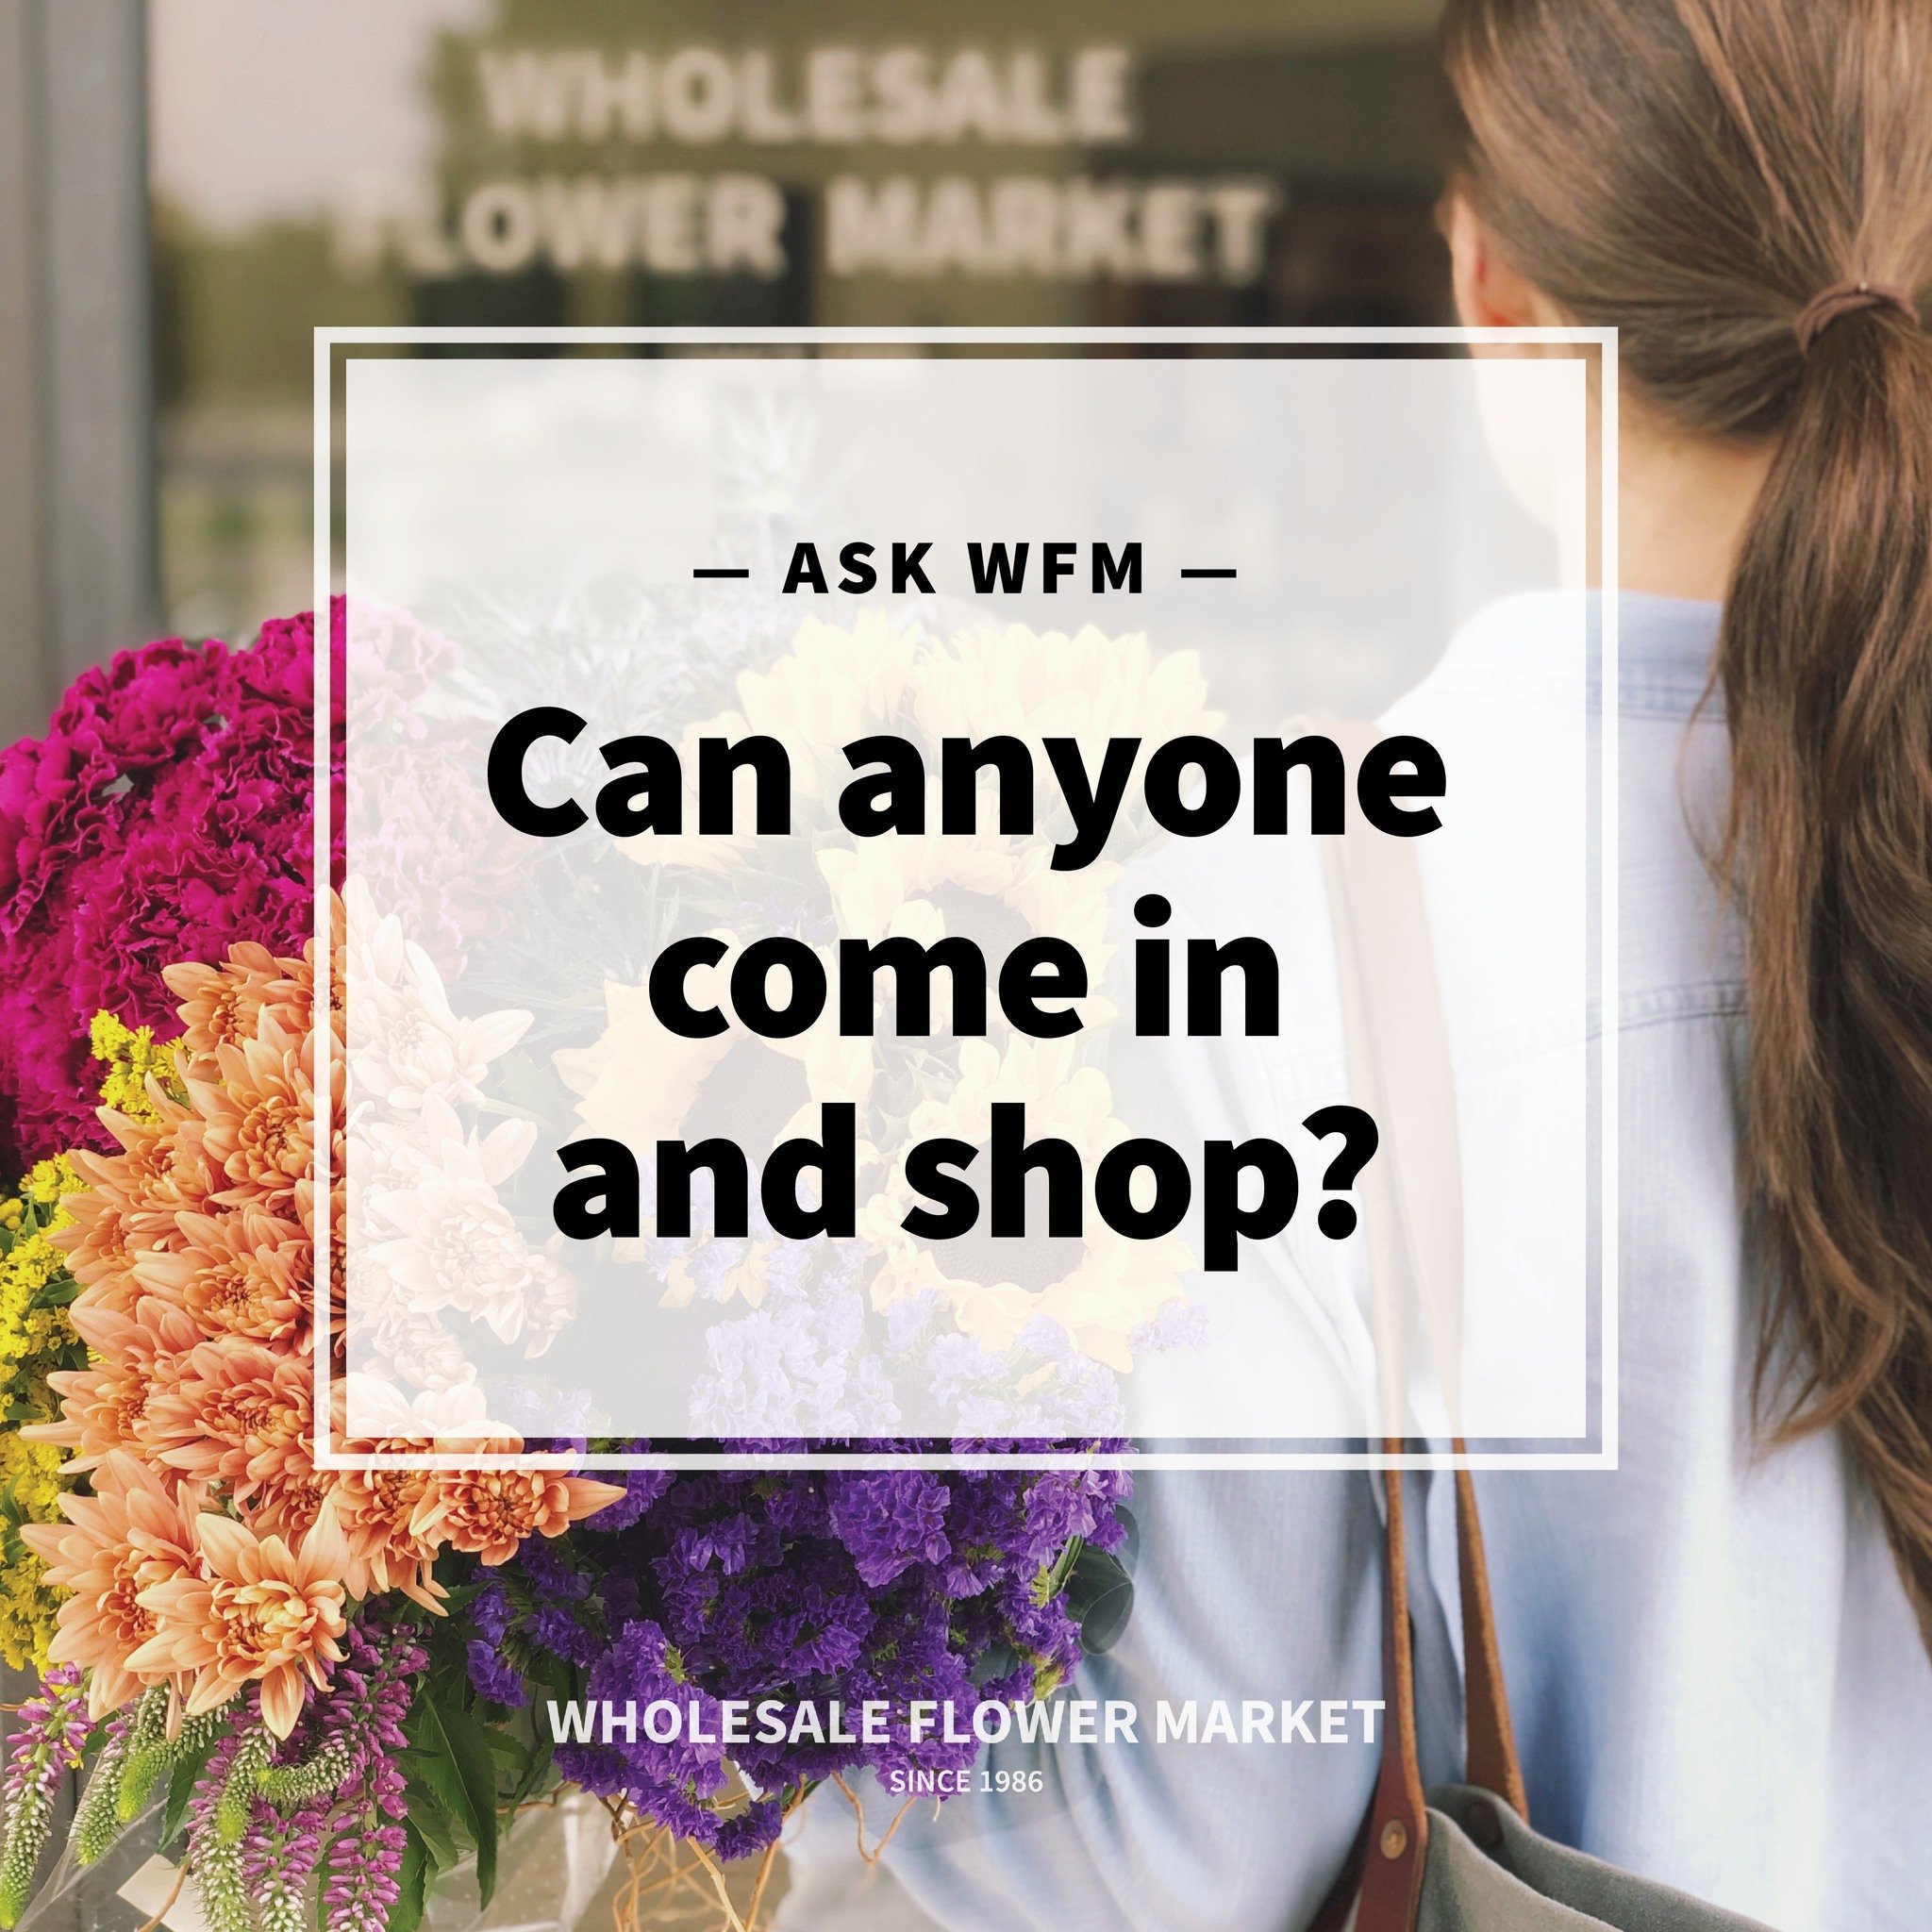 &quot;Can anyone come in and shop?&quot;

💐 Yes! We&rsquo;re open to the public. We&rsquo;re happy to serve both trade customers and retail customers out of our conveniently located shop in the heart of Greenbrier. So, come on in and pick up some fl